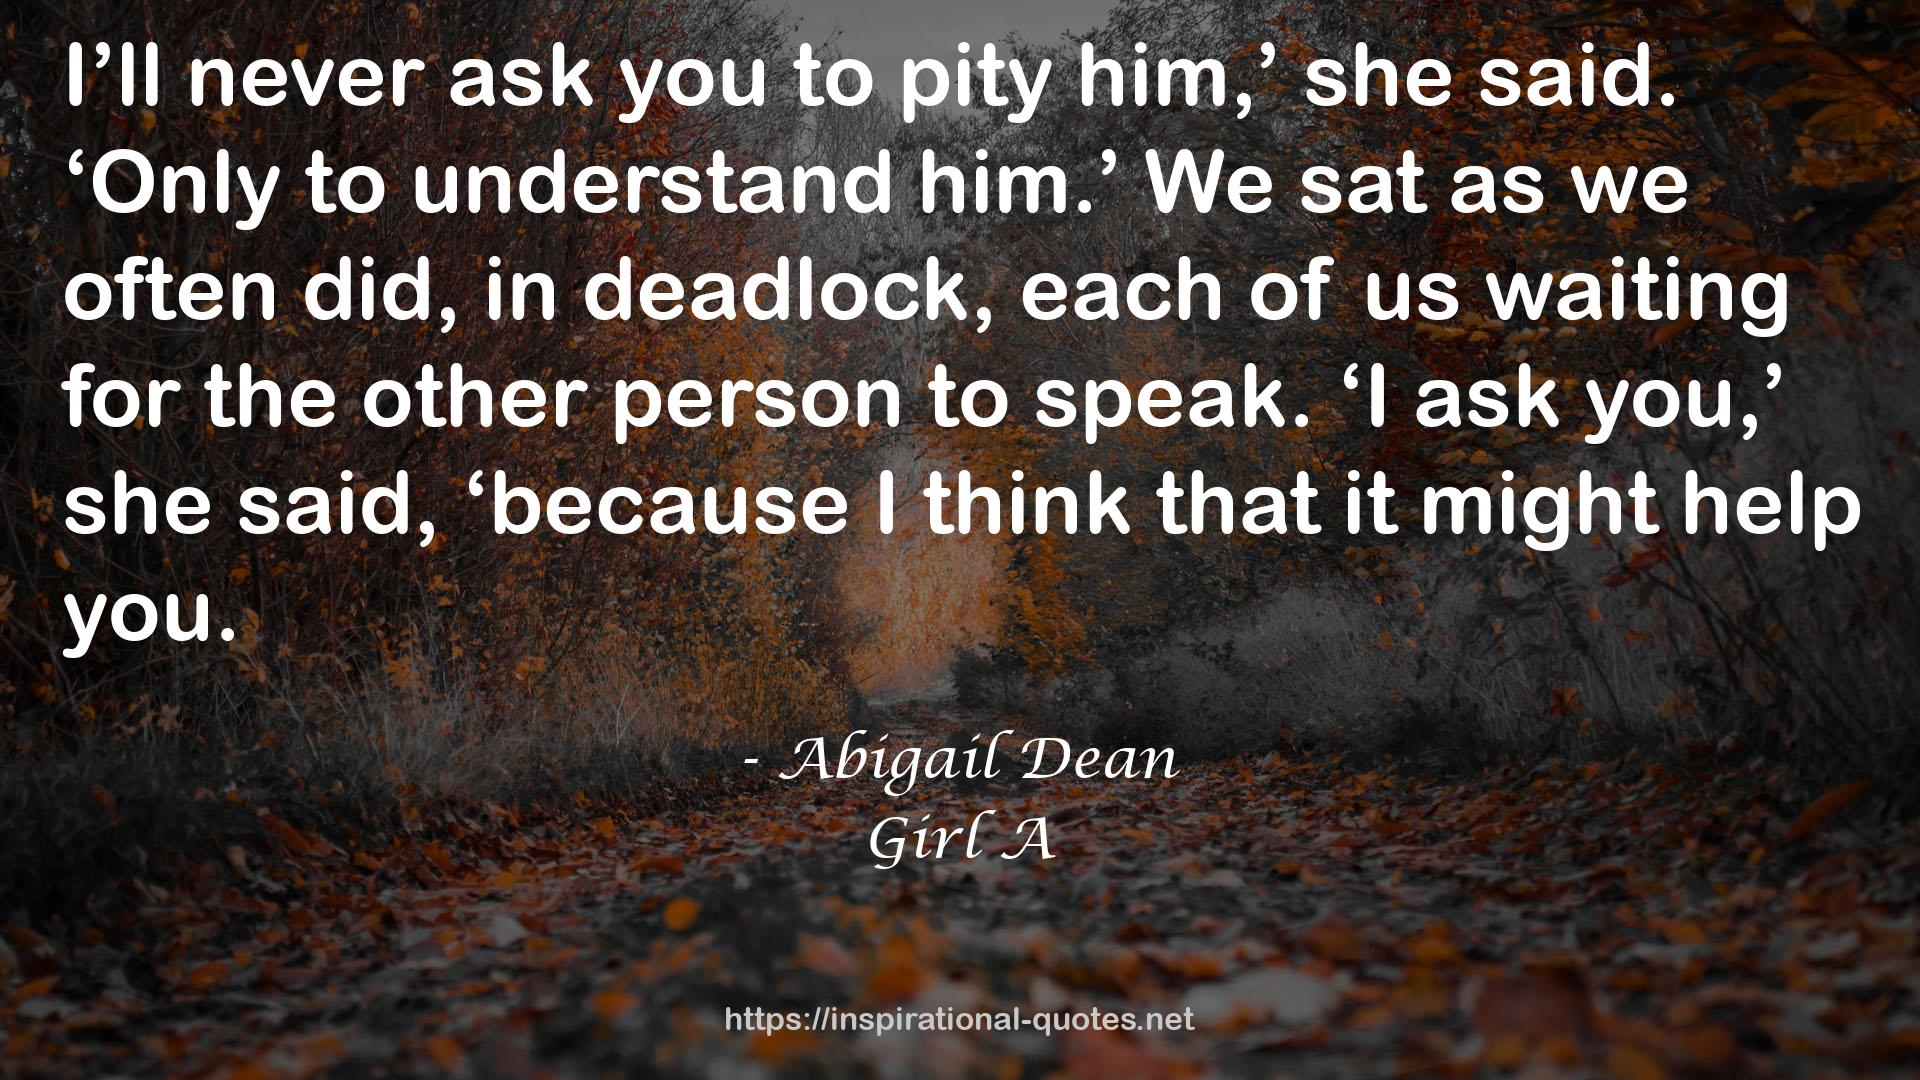 Girl A QUOTES